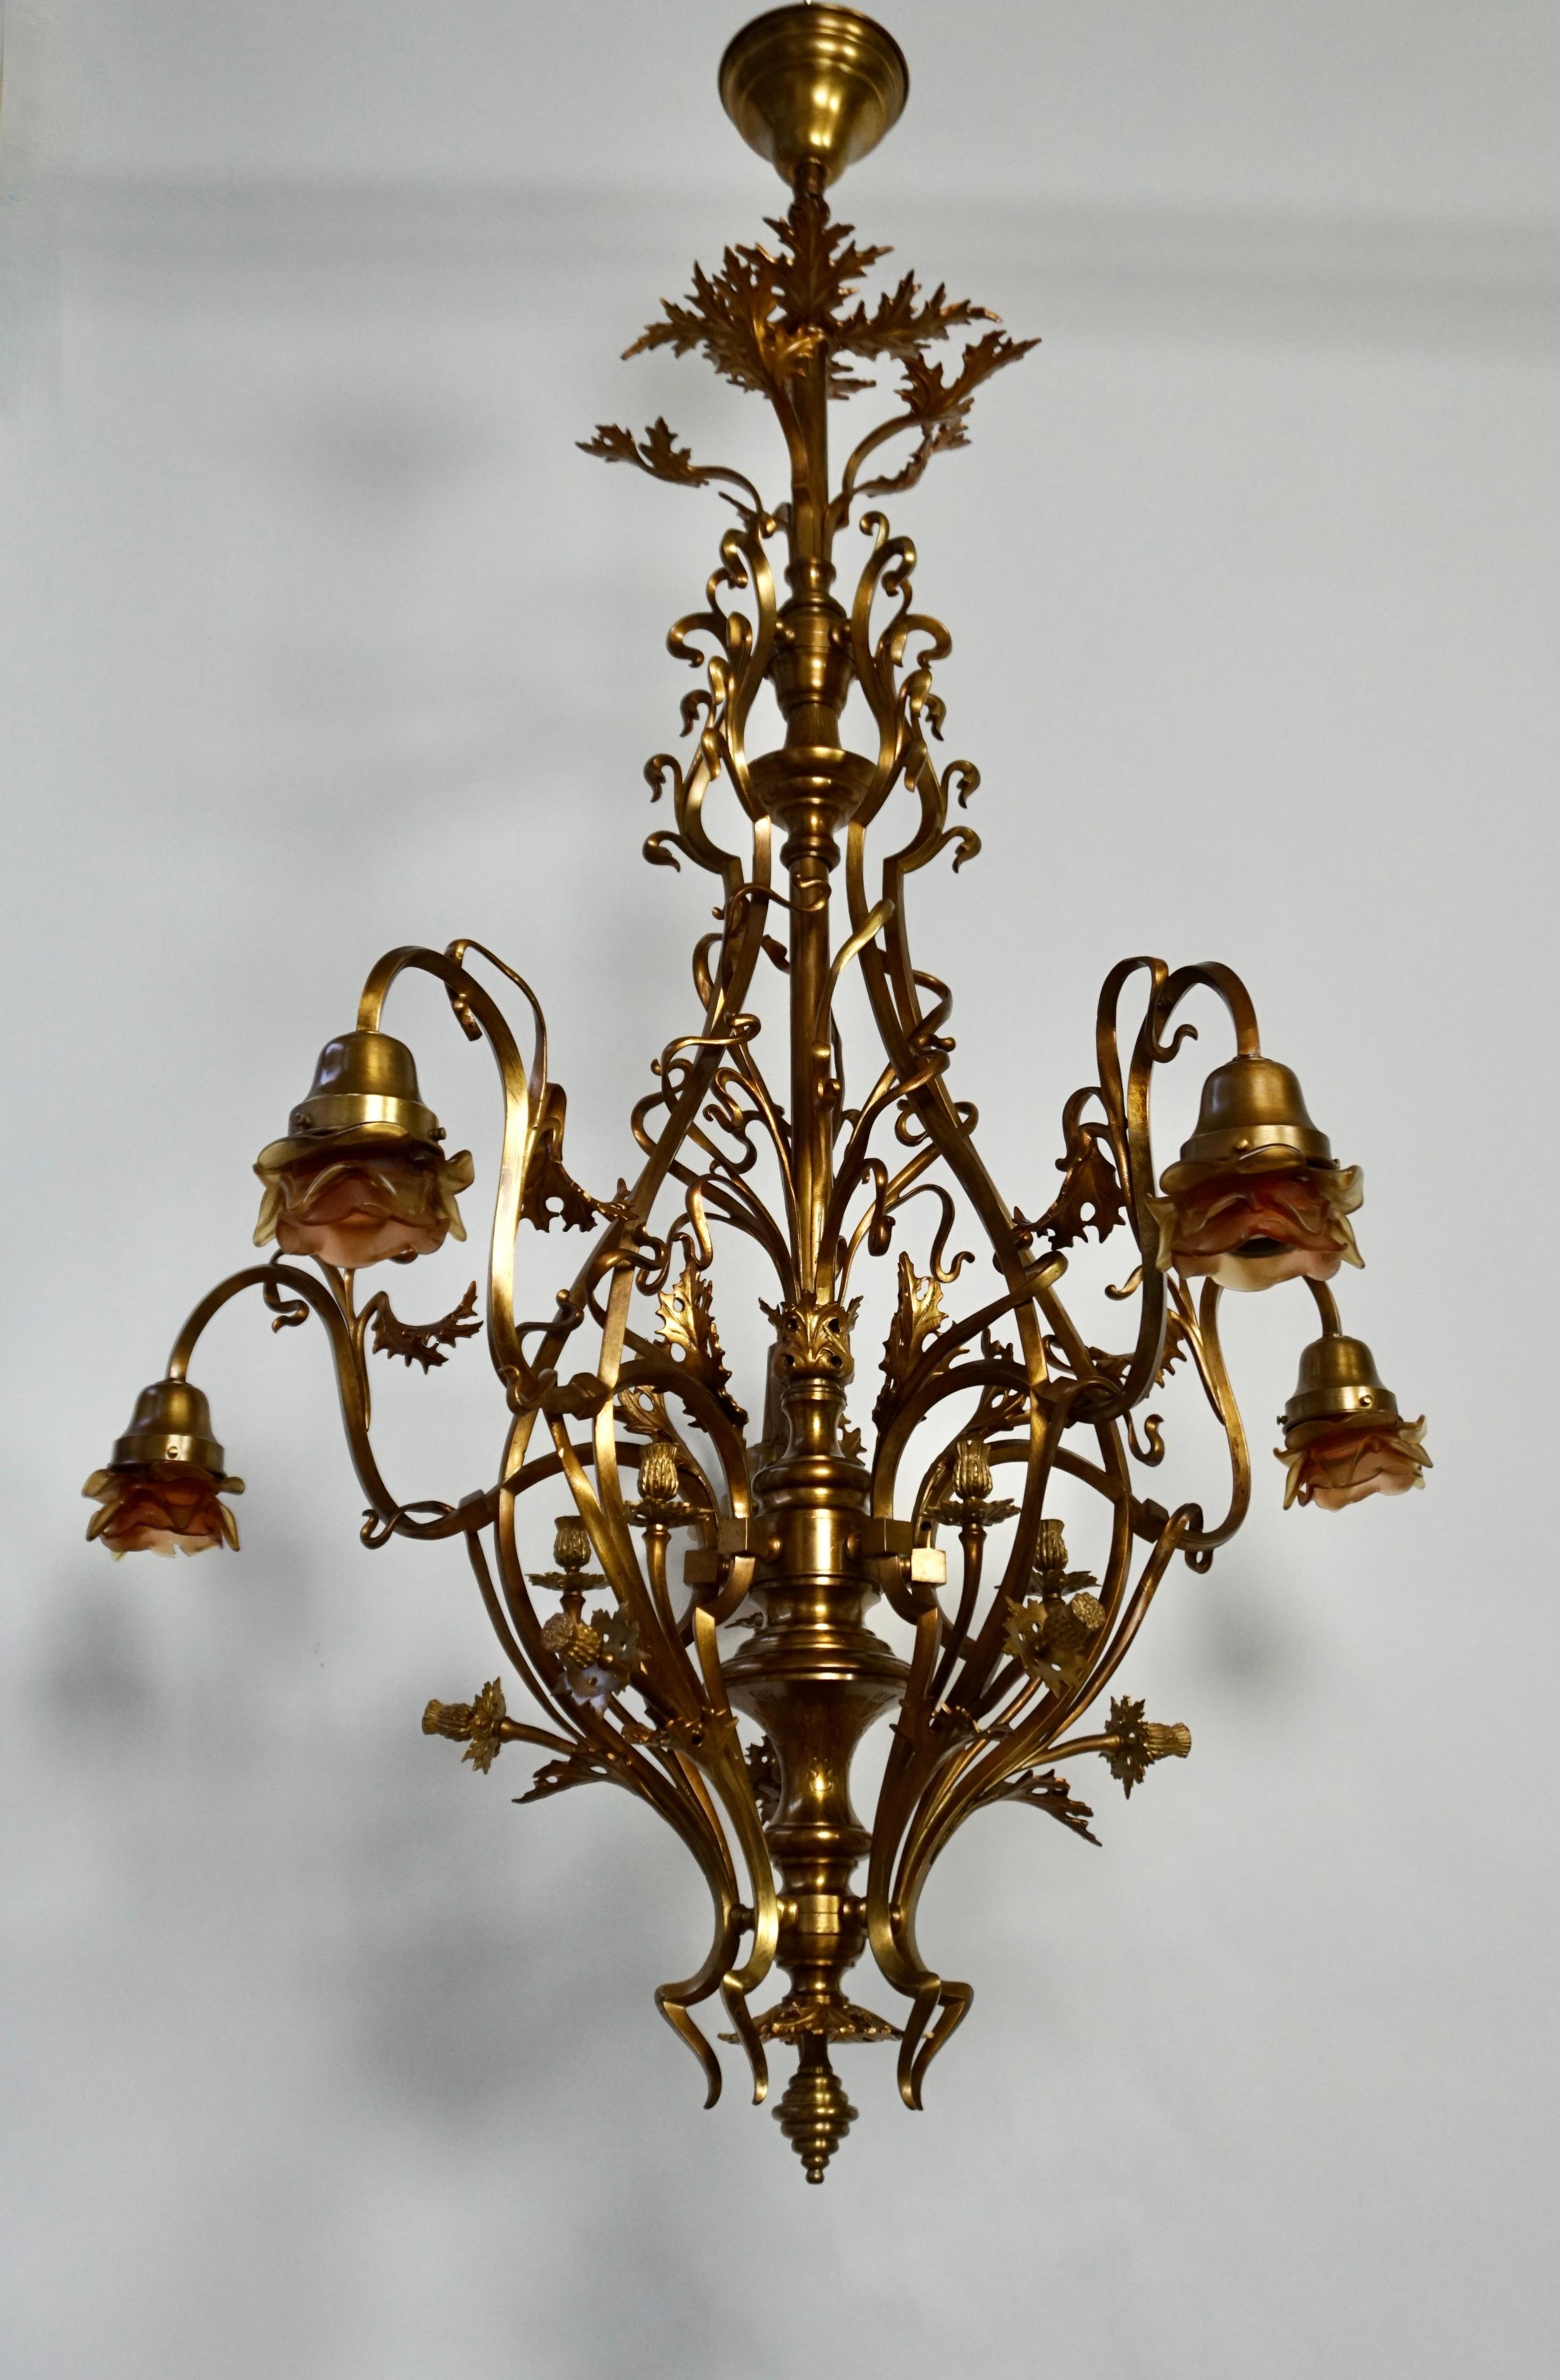 Hand-Crafted Large and Top Quality, Elegant & Exquisite 5 Light Art Nouveau Chandelier For Sale